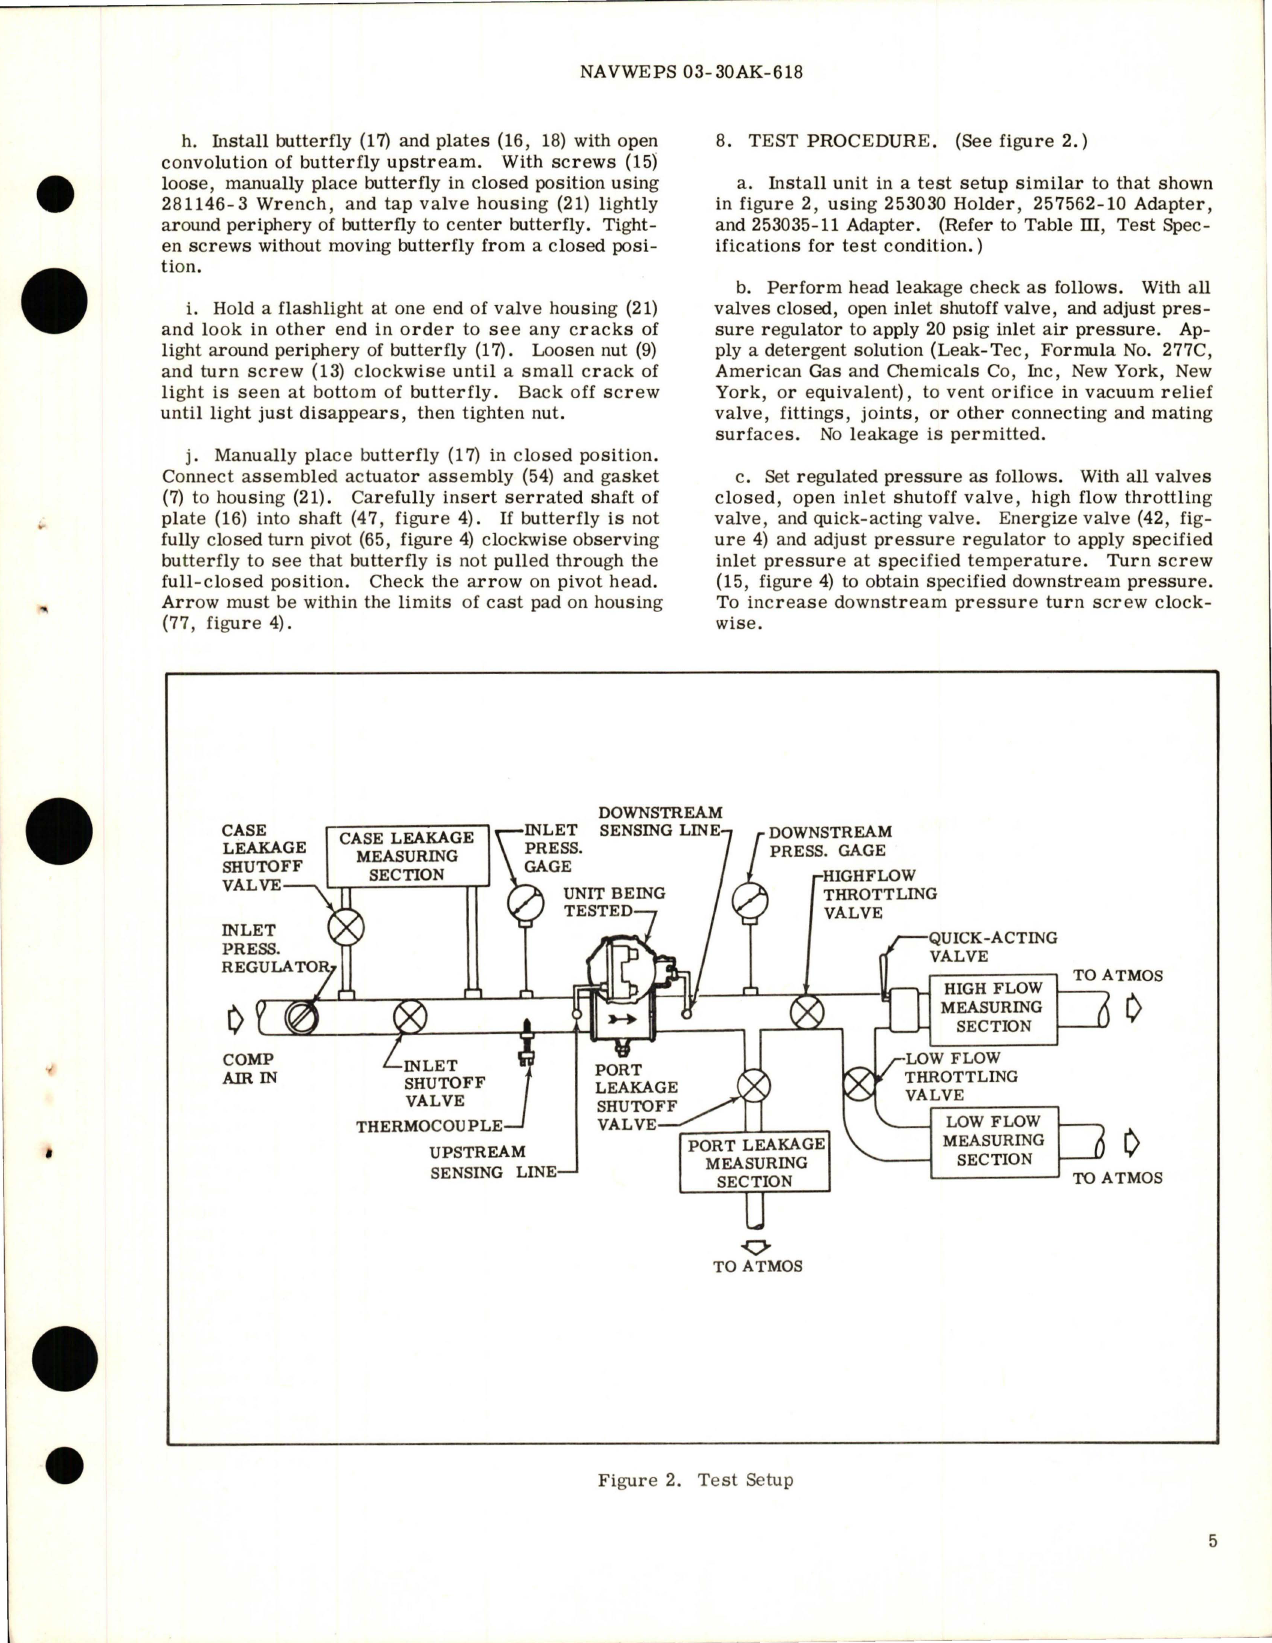 Sample page 7 from AirCorps Library document: Overhaul Instructions with Parts Breakdown for Pressure Regulating Air Shutoff Valve - Part 105230-450-2, SR 7